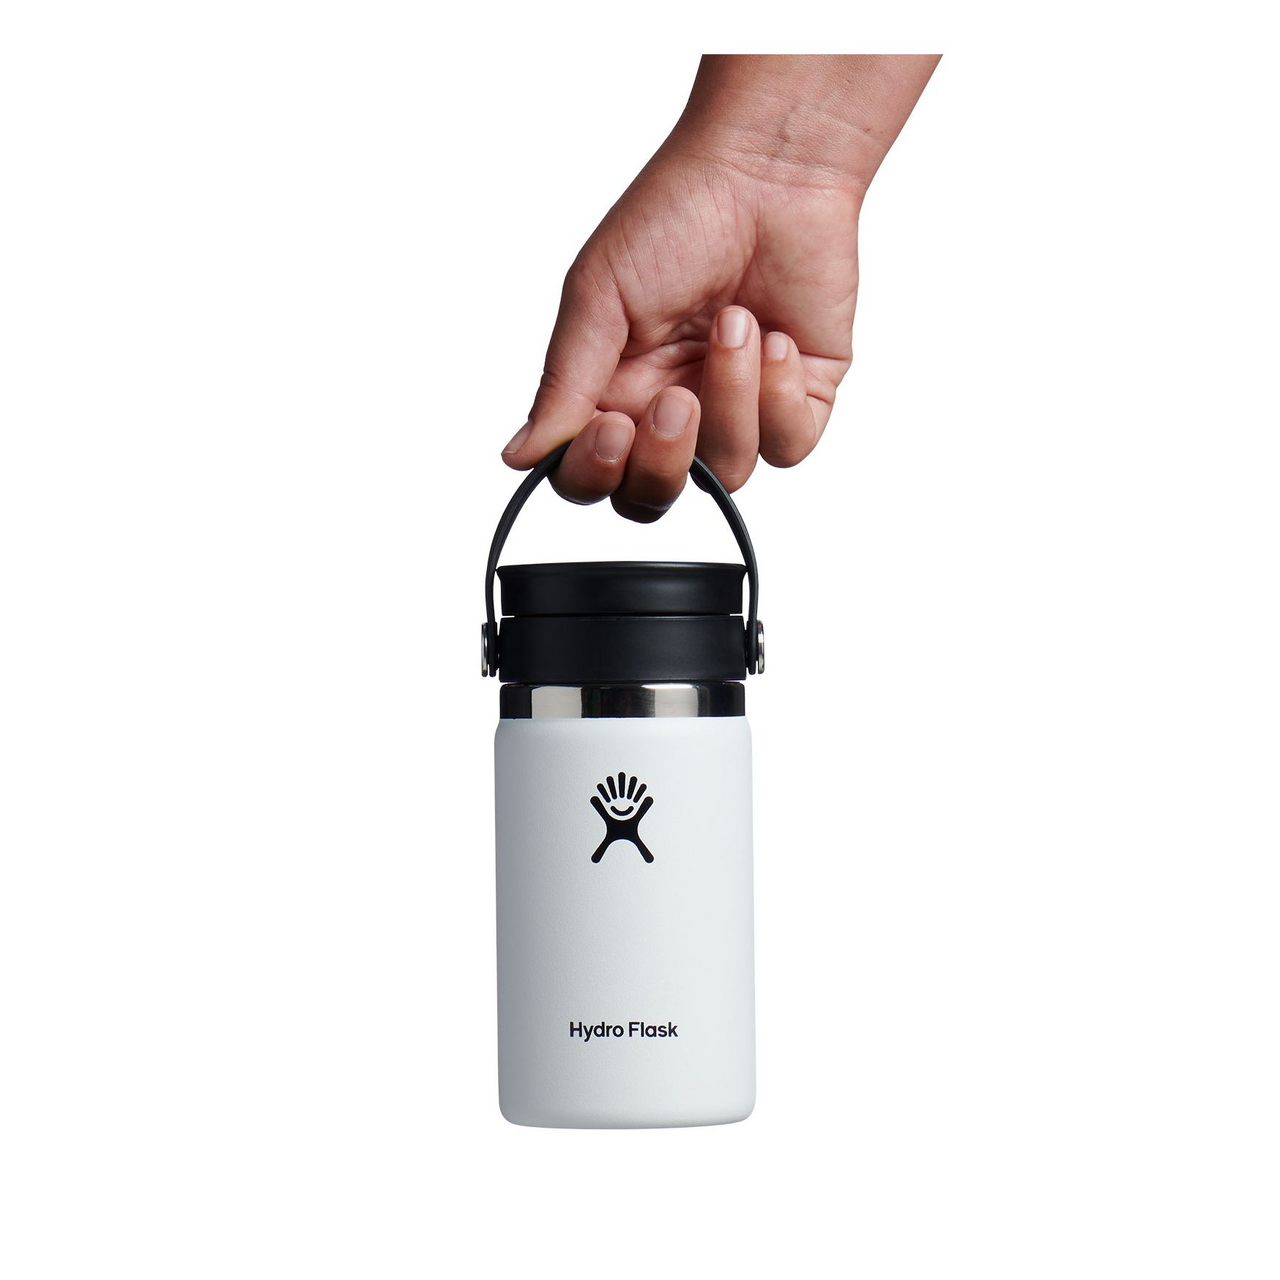 Hydro Flask 12 Oz Coffee Cup with Flex Sip Lid - White